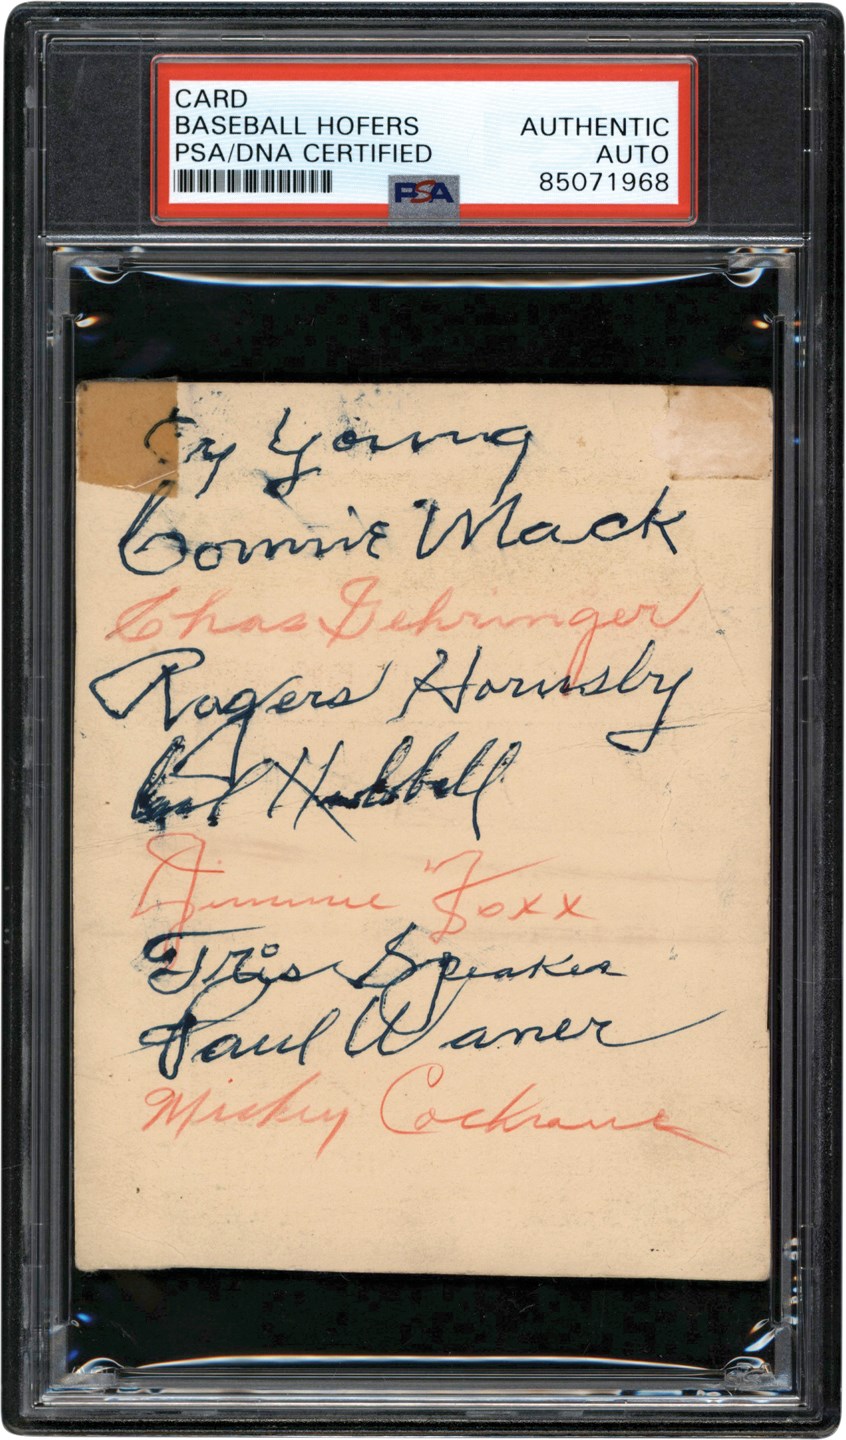 Cy Young, Jimmie Foxx, & Hall of Famers Multi-Signed Kid Nichols Day Card (PSA)